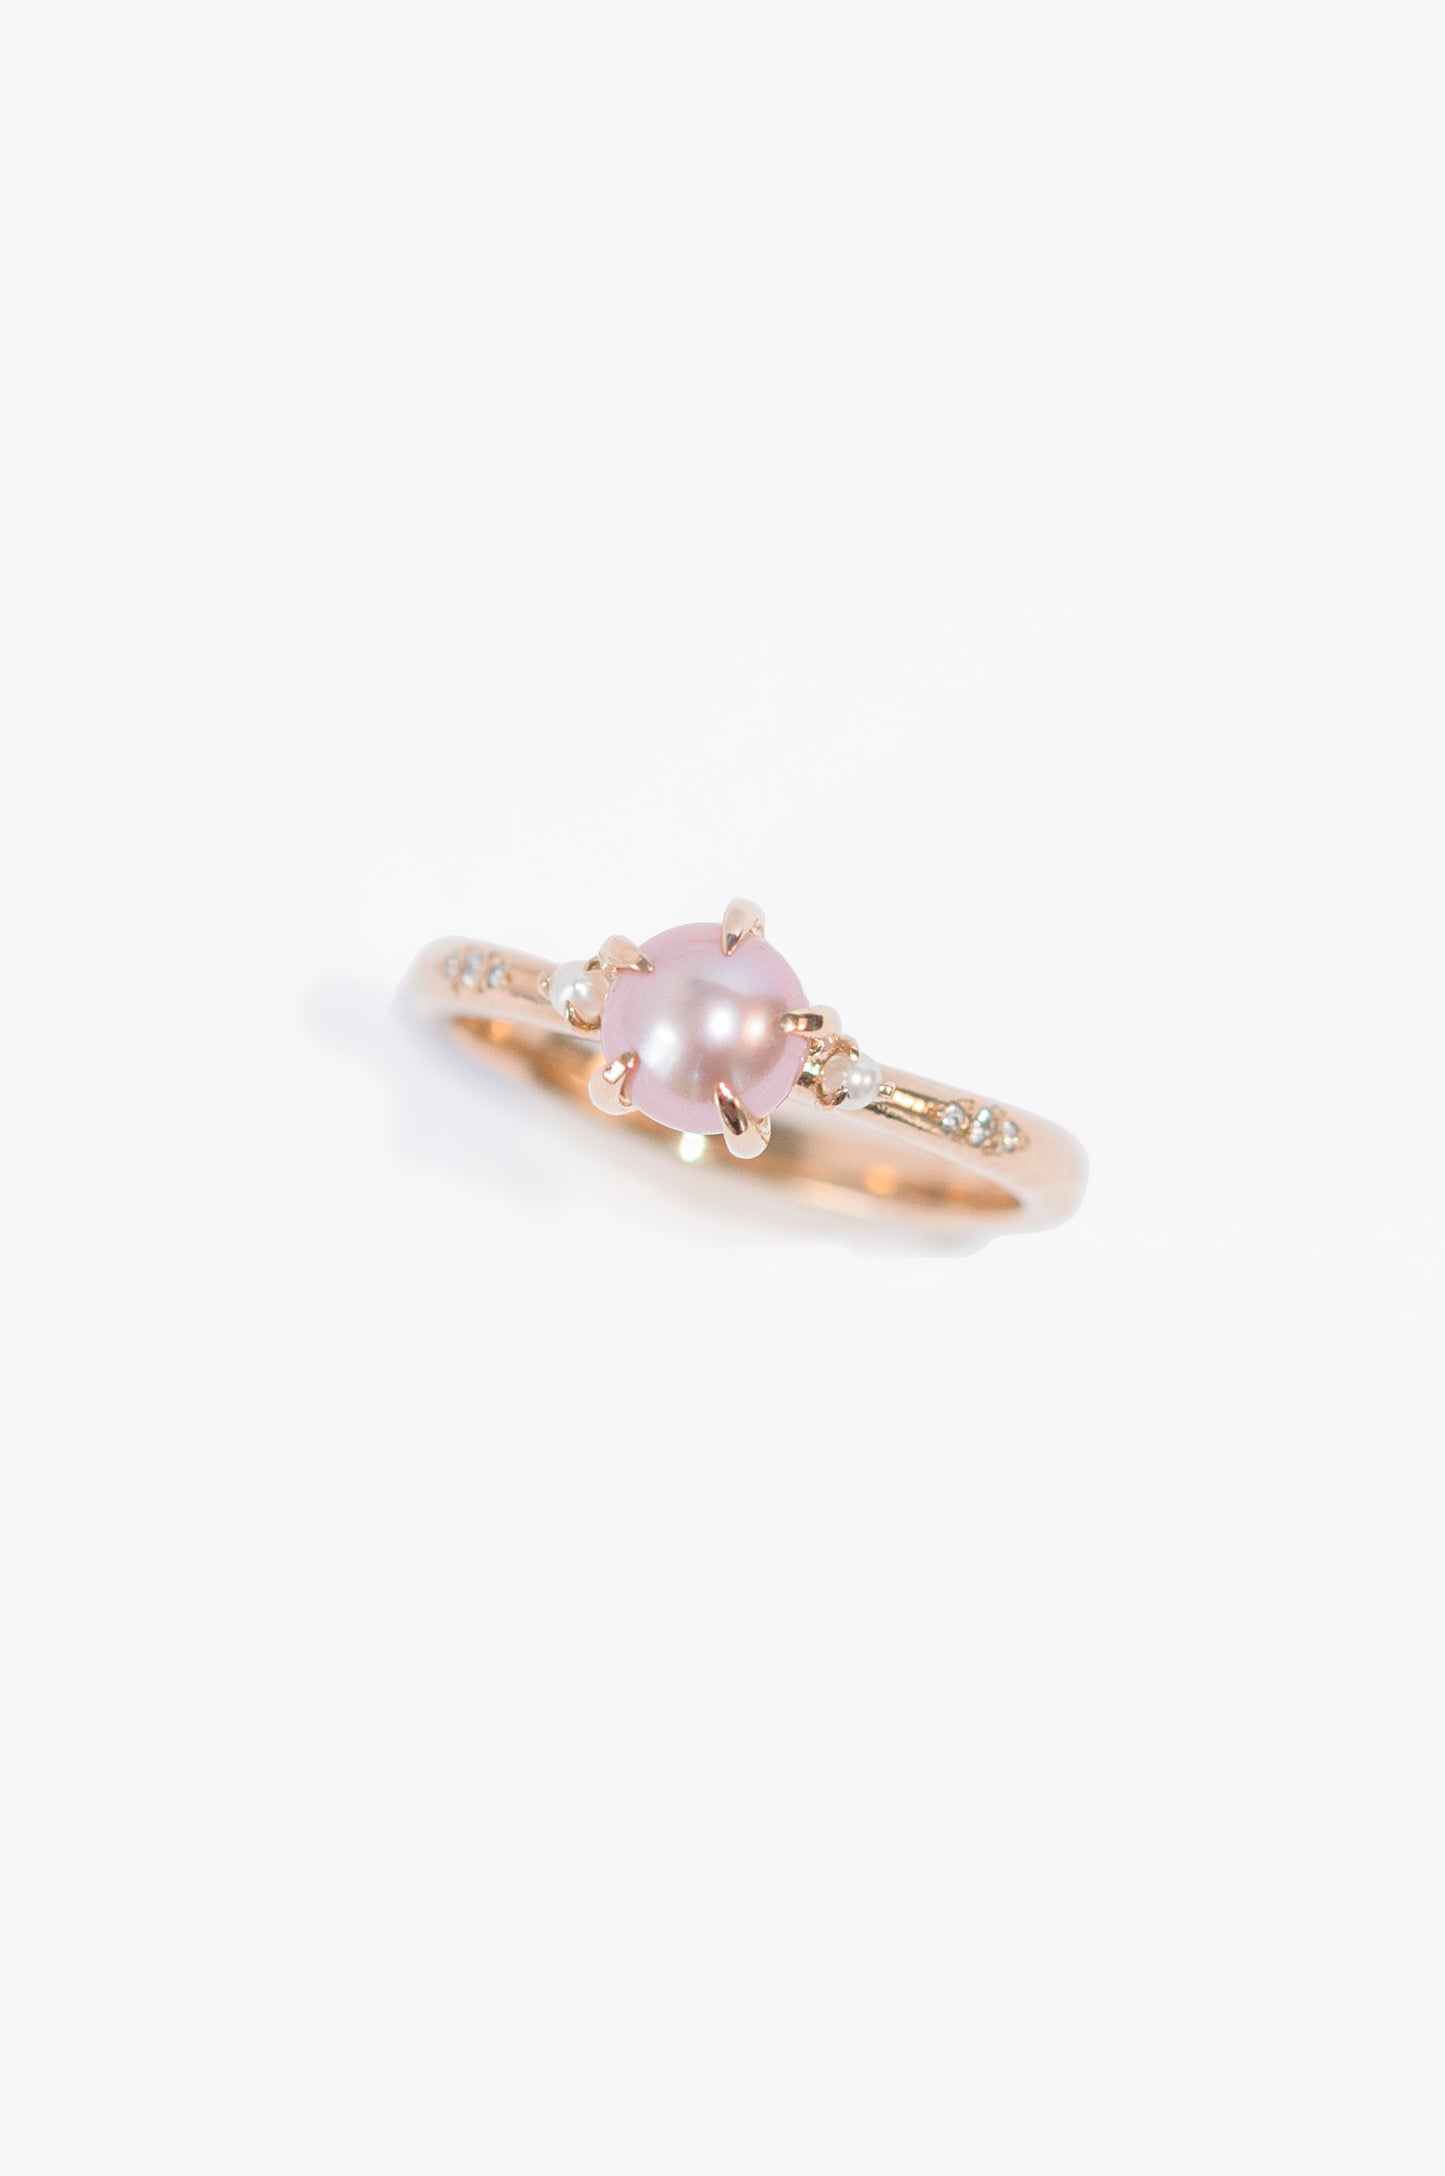 Champagne Rose Ring